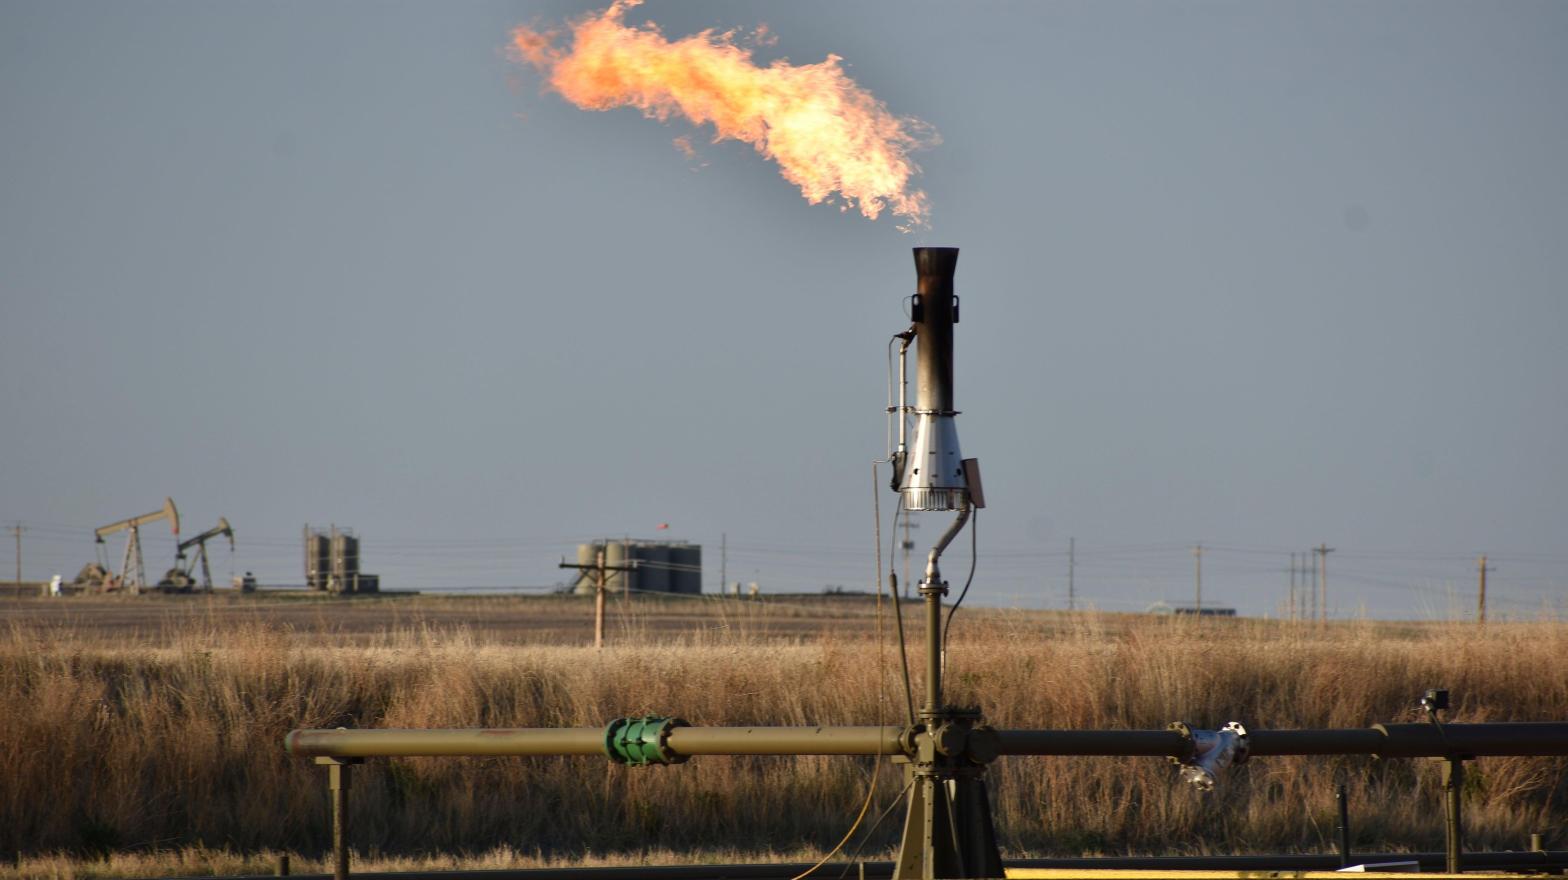 A flare, which burns excess gas, including methane, at a well pad in North Dakota. (Photo: Matthew Brown, AP)